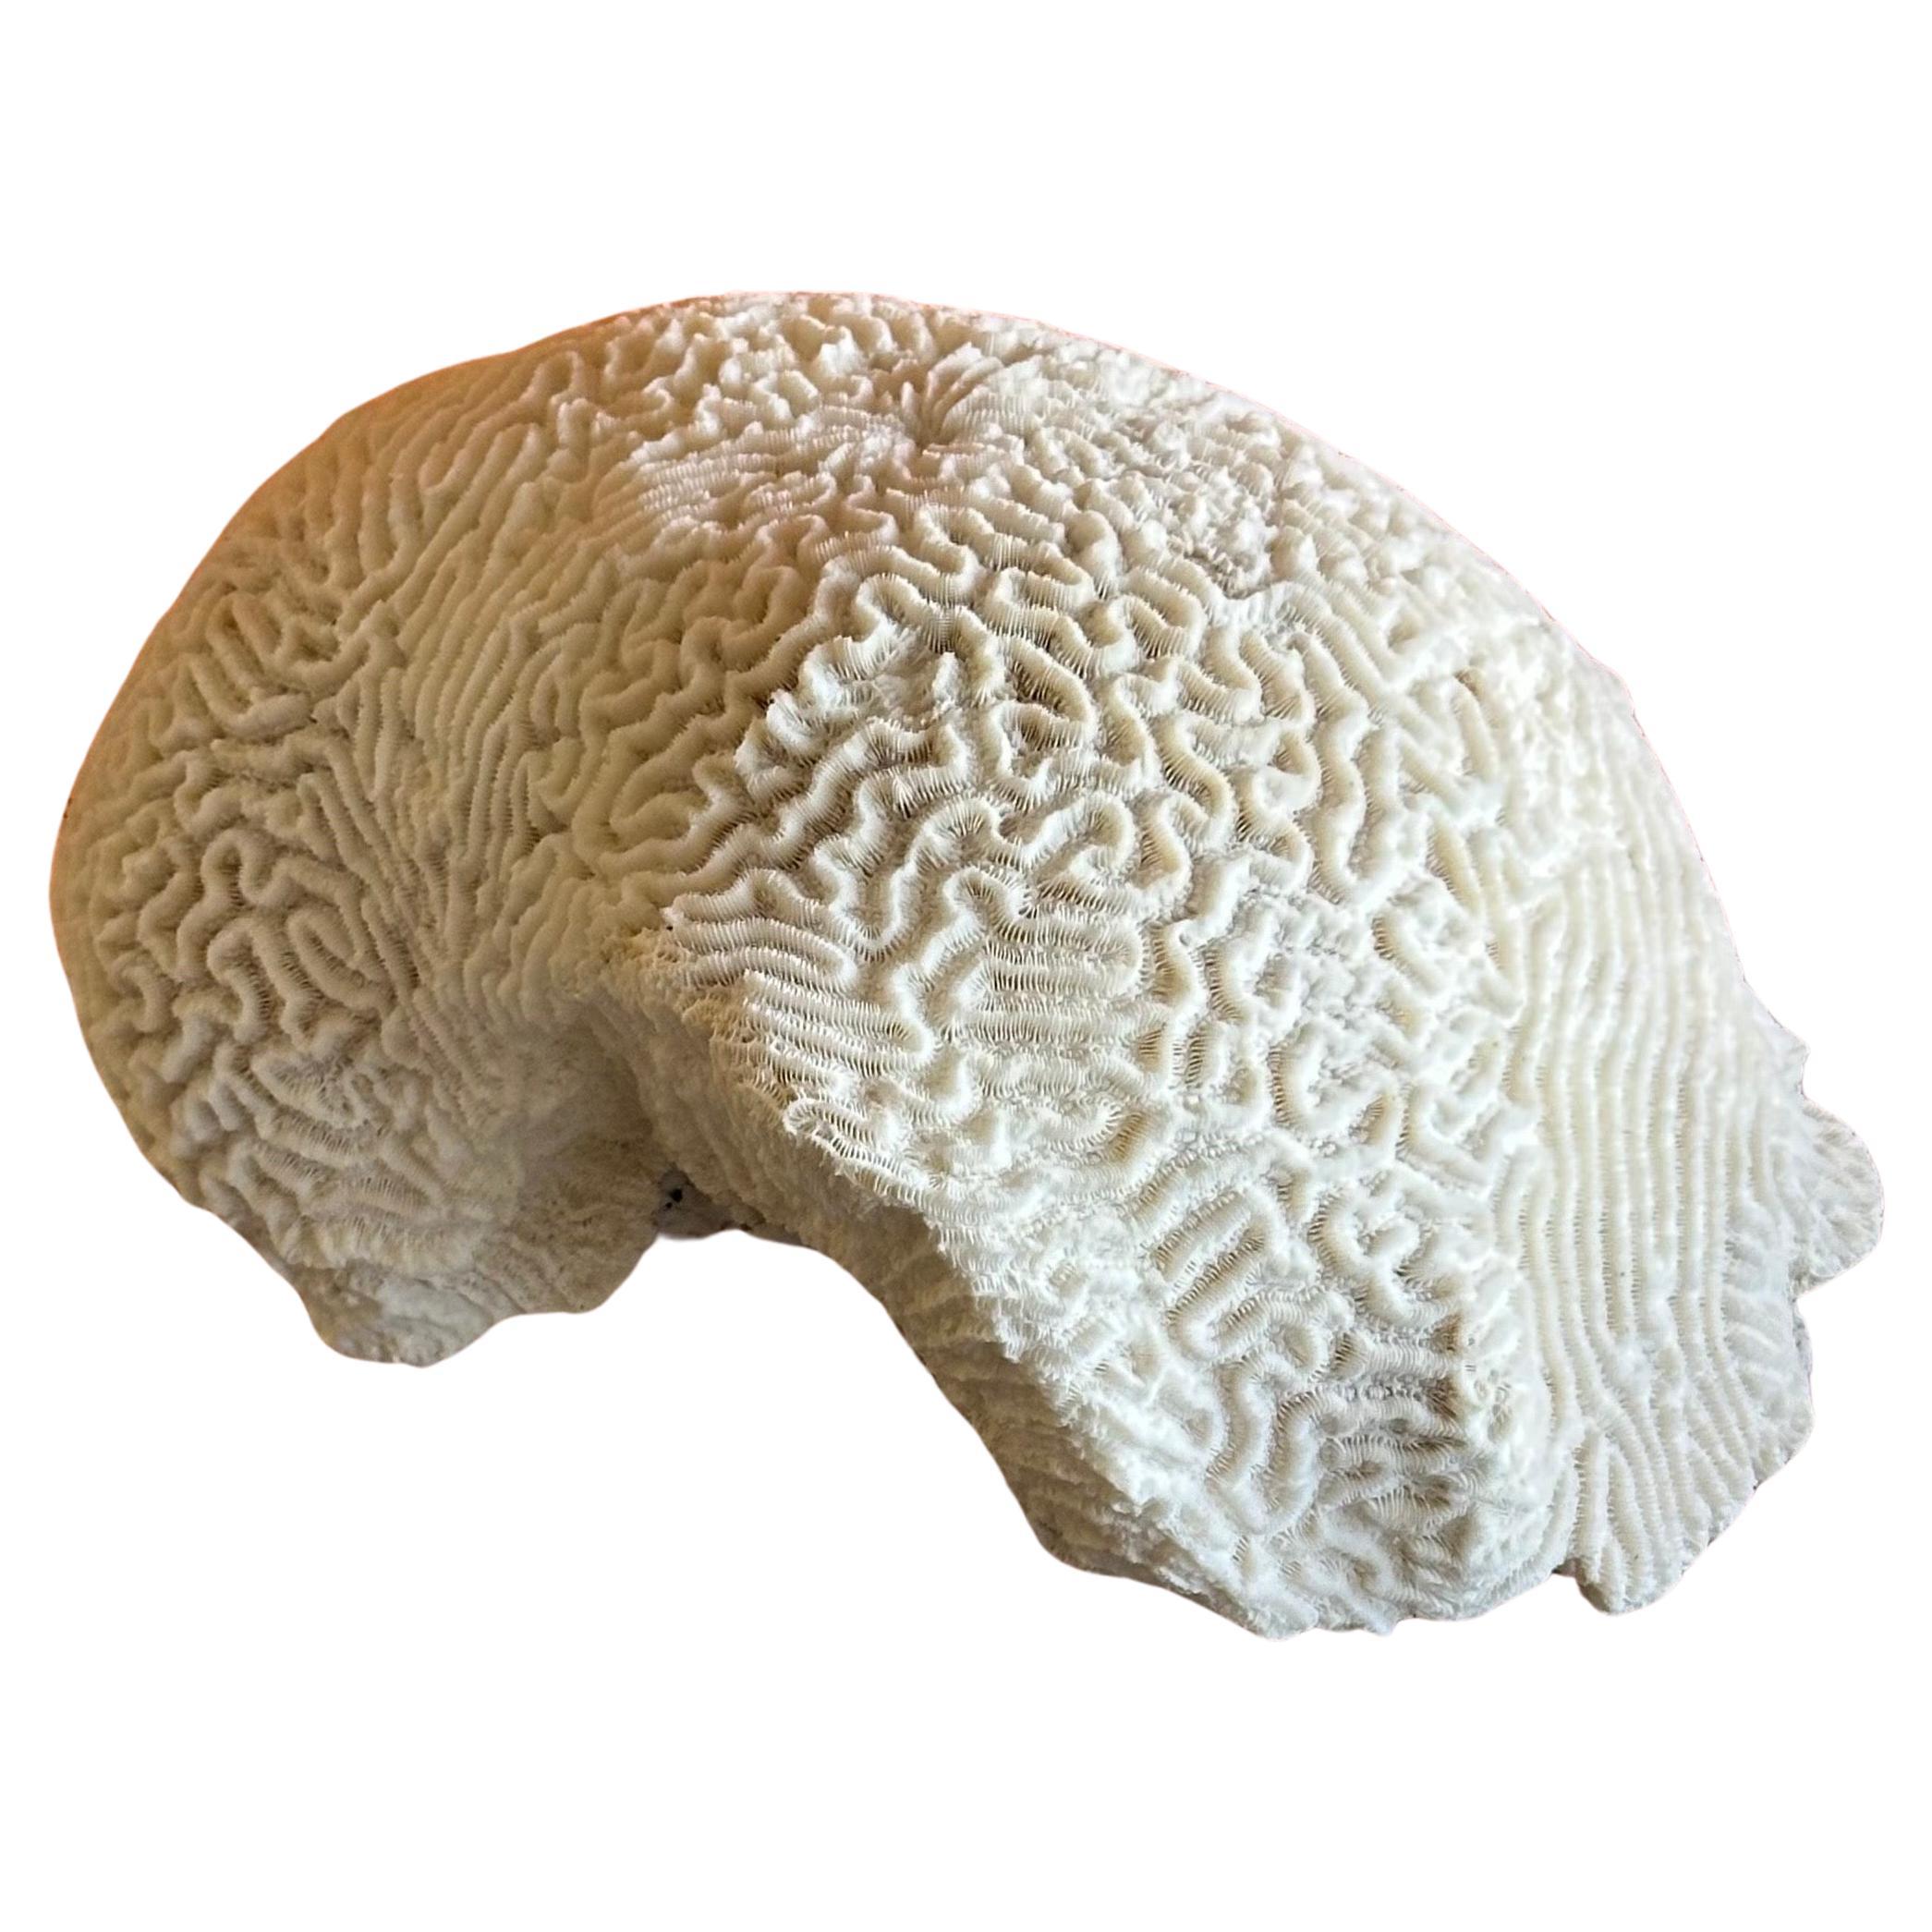 Large Natural White "Brain" Sea Coral Specimen on Lucite Stand For Sale